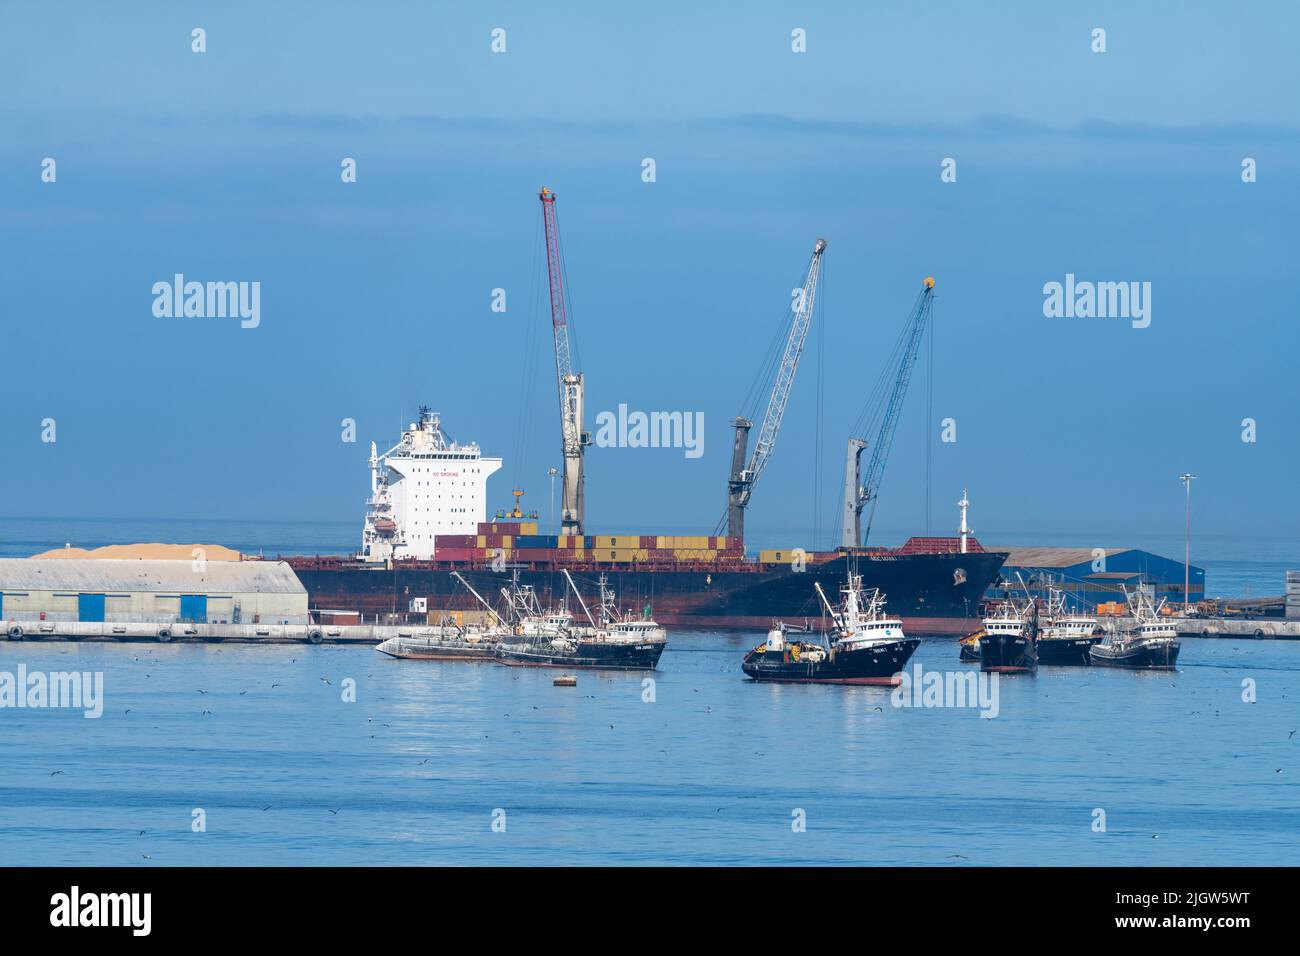 The port of Arica, Chile with commercial fishing boats and cranes loading containers on a cargo ship. Stock Photo